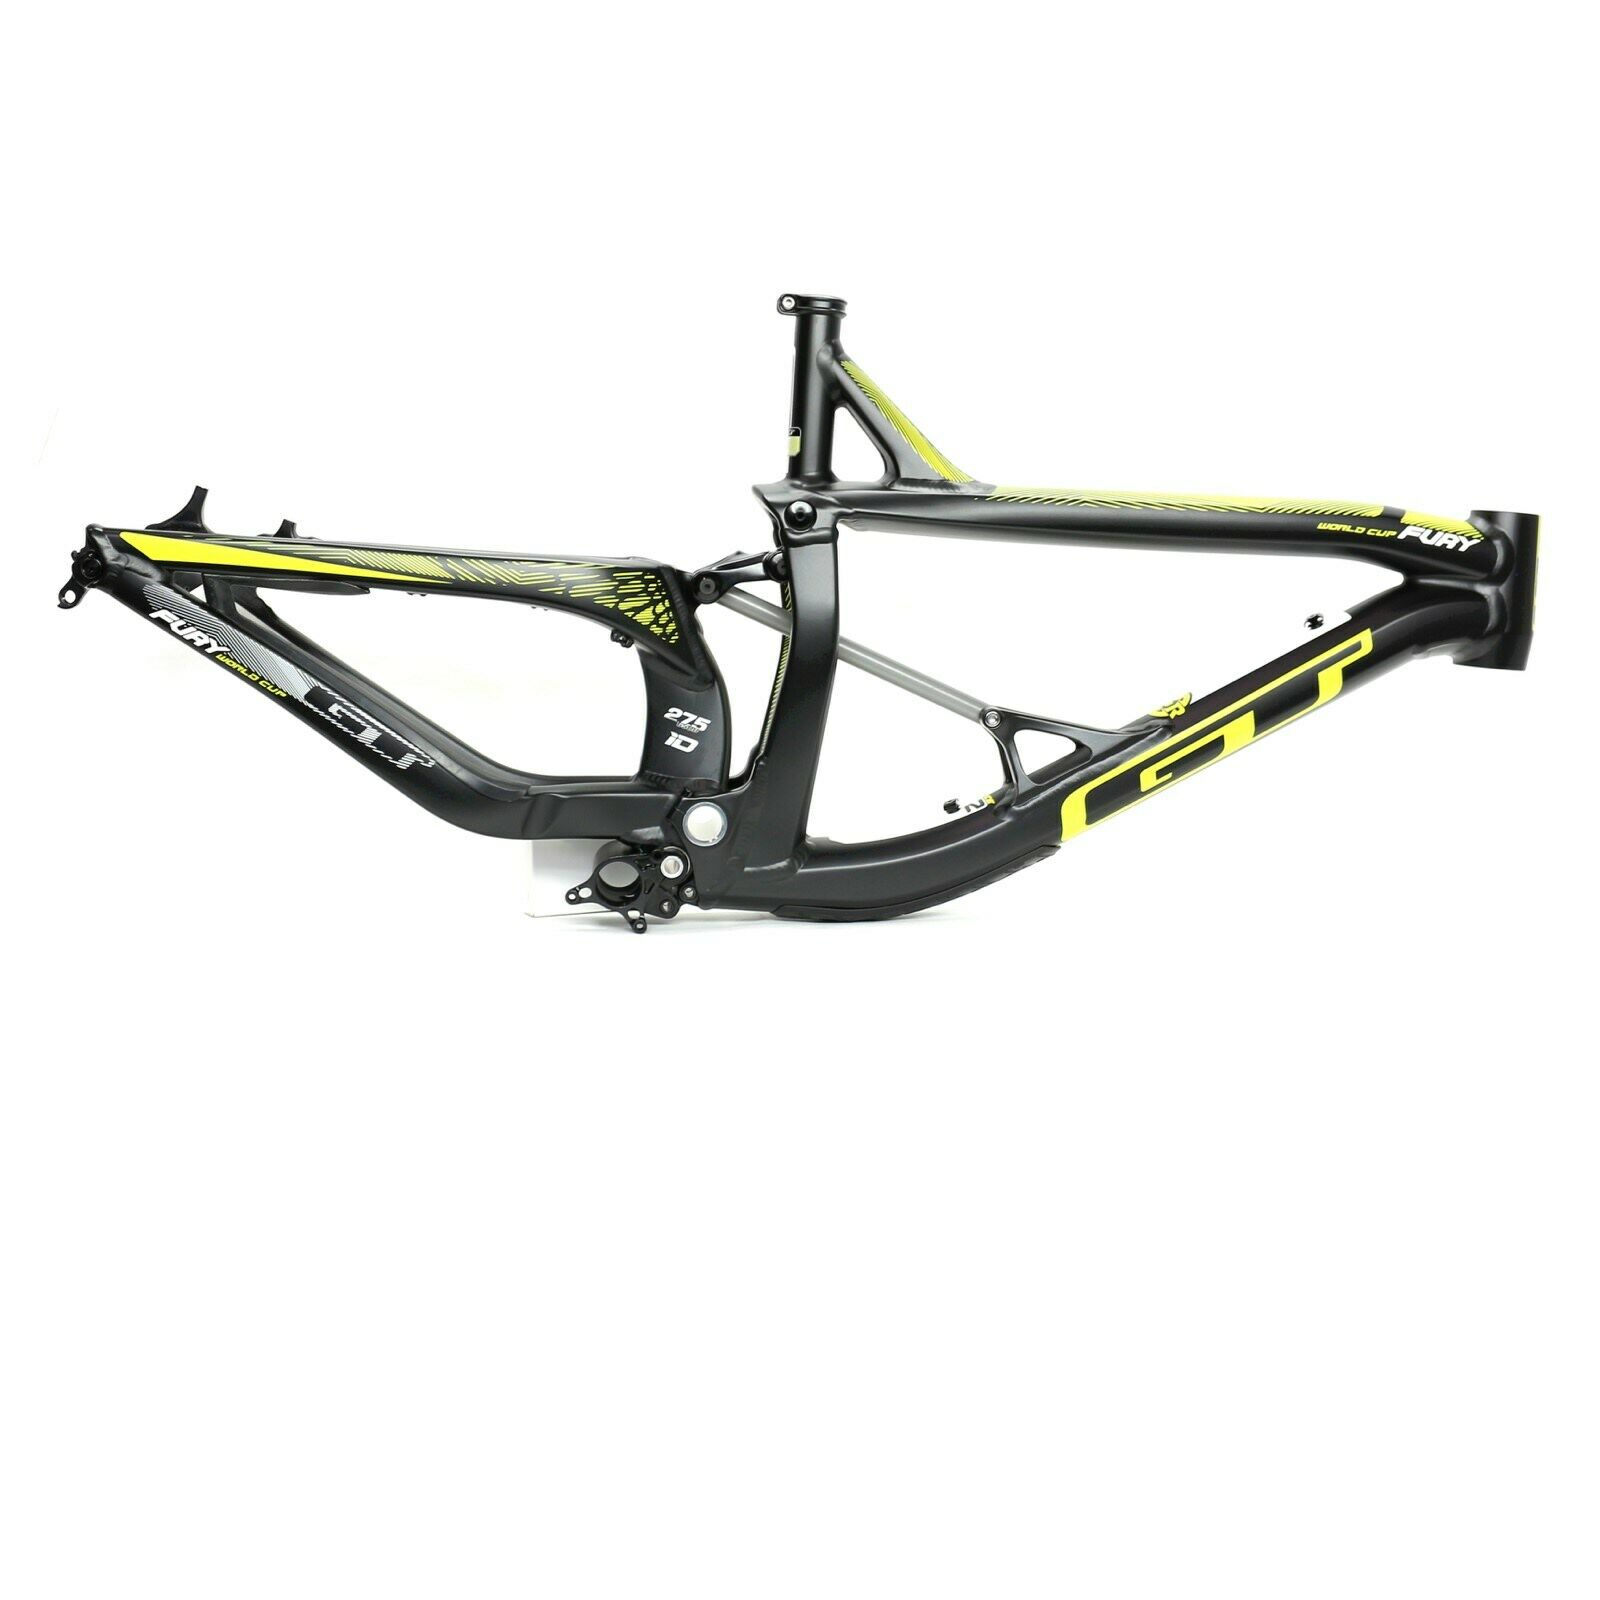 Gt Bicycles 2015 Fury World Cup Alloy 650b Frame Only Medium Black/yellow Nos